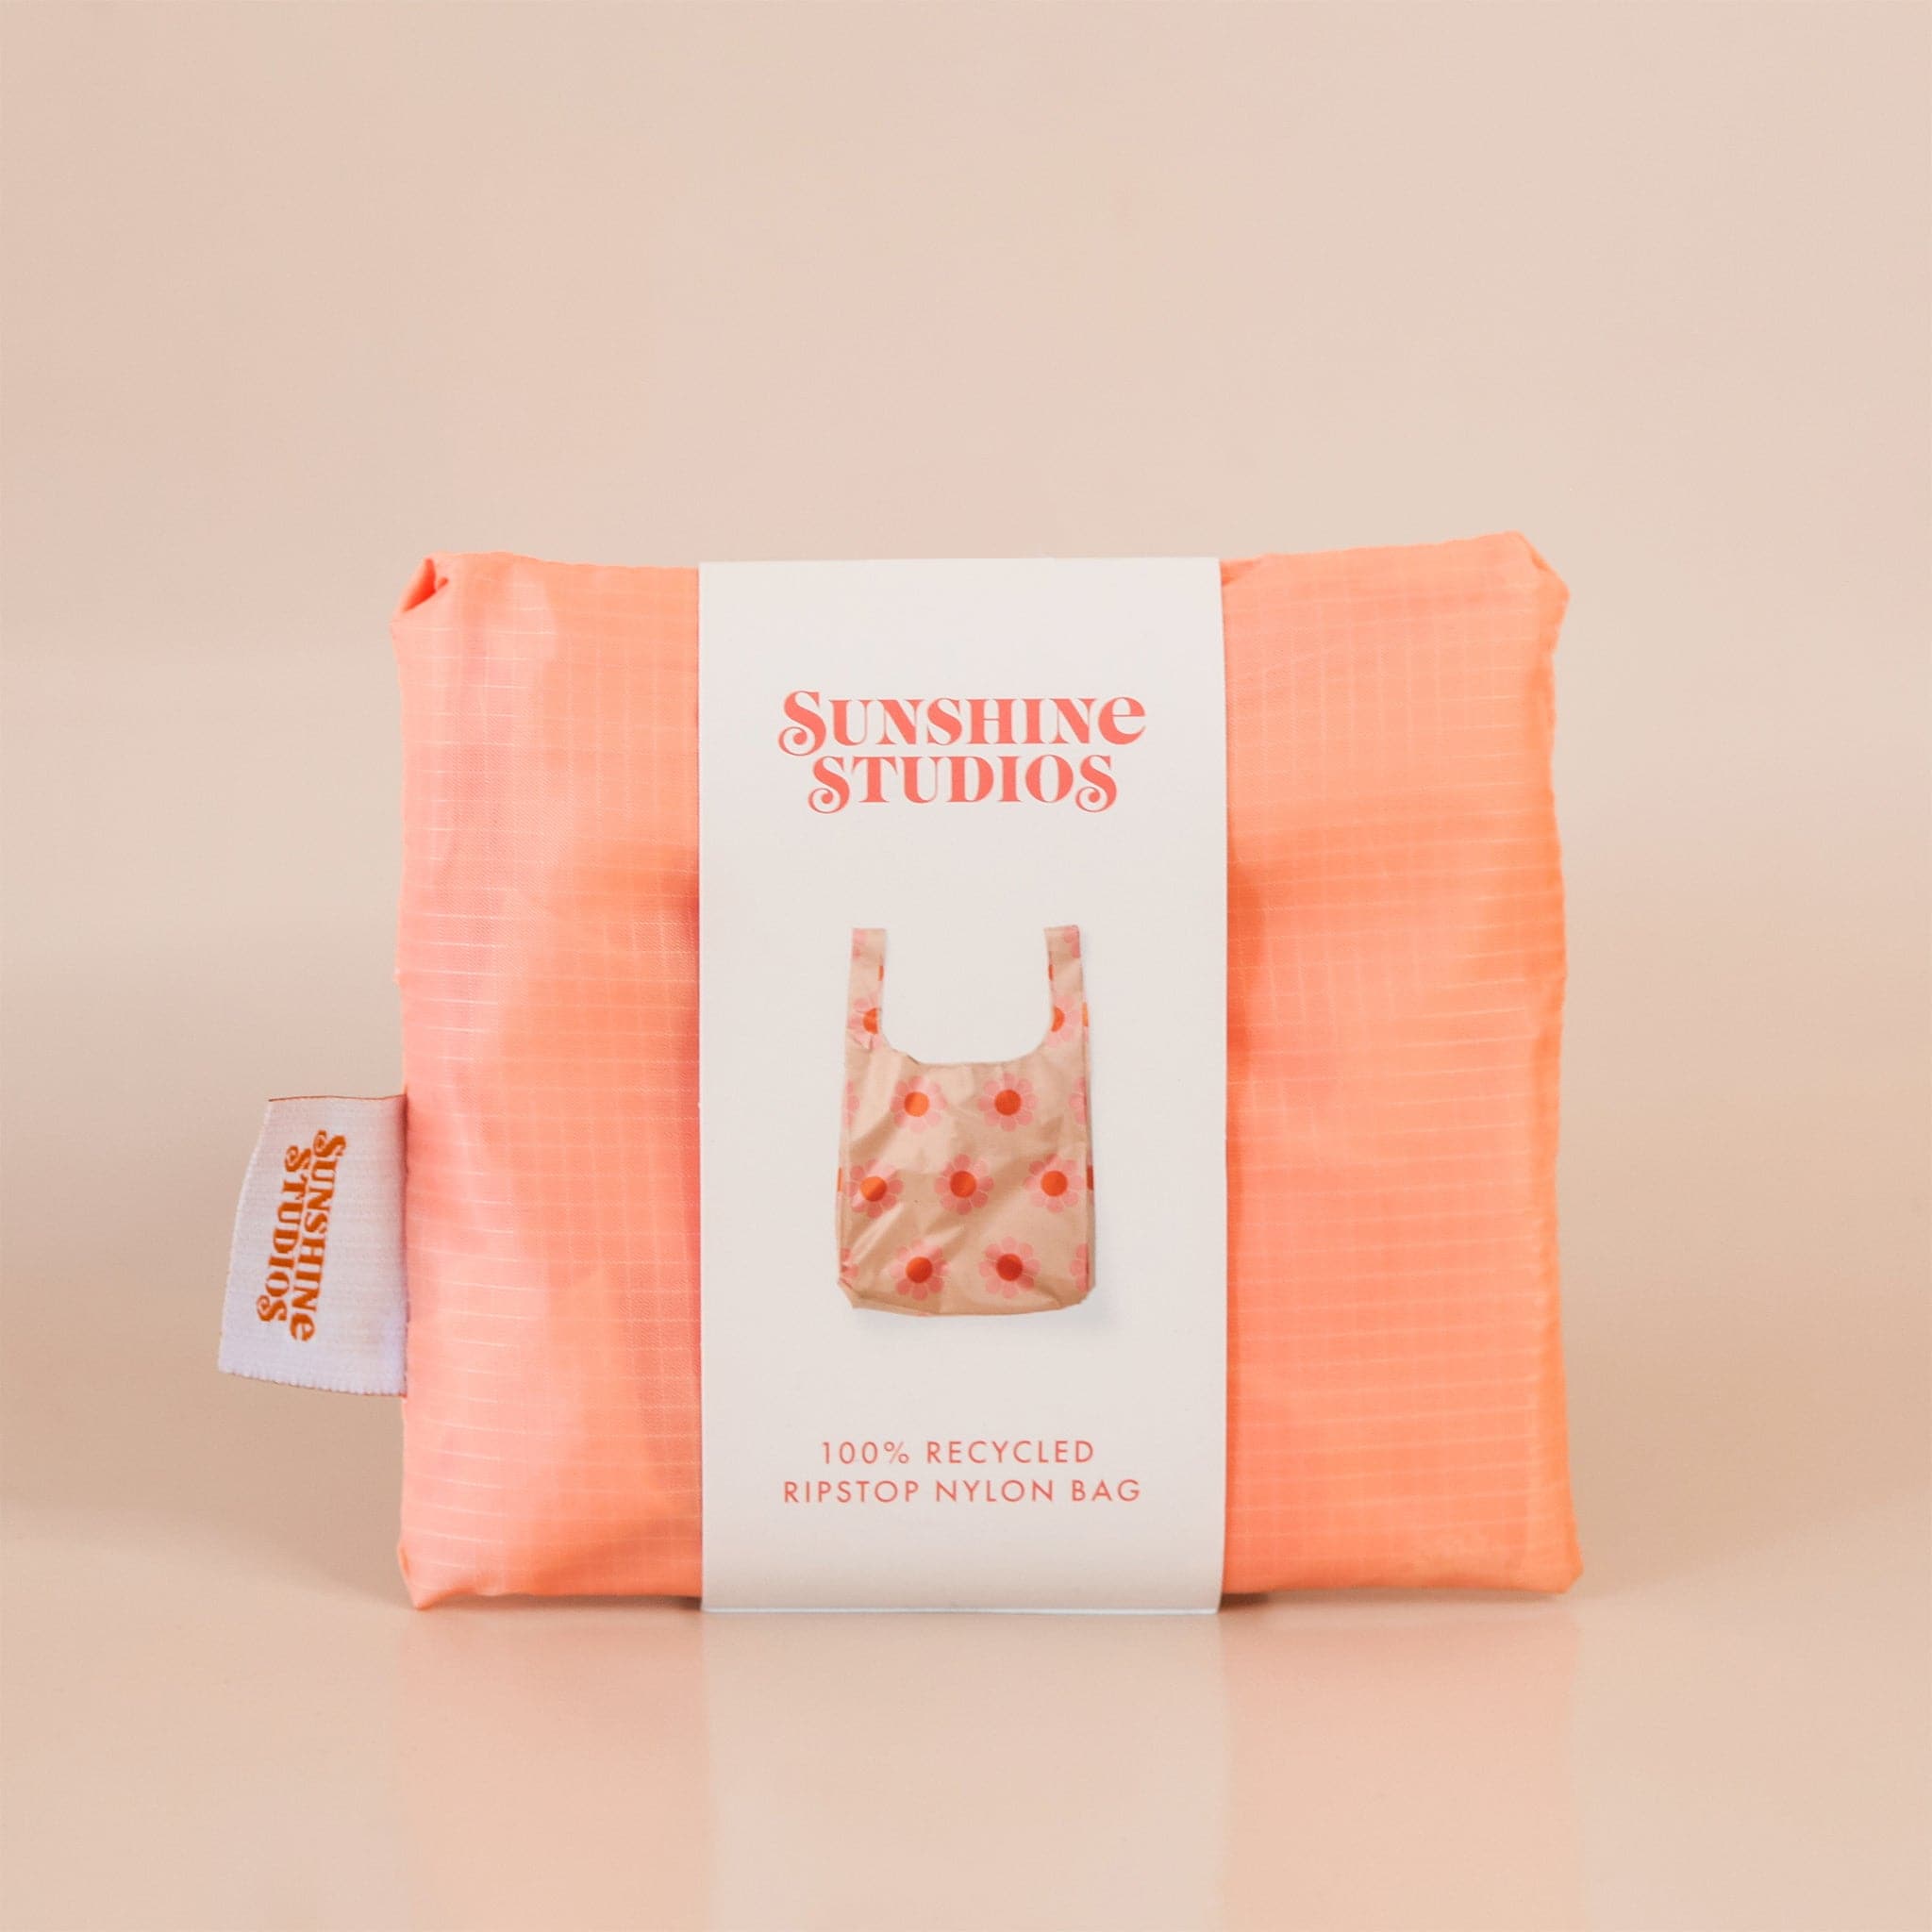 Peach reusable bag folded tightly into a square. The bag is wrapped in a white band that reads ’sunshine studios'. Under the text is a picture of the reusable bag. On the left side of the bag is a white tag with bright orange text that reads ’sunshine studios.'